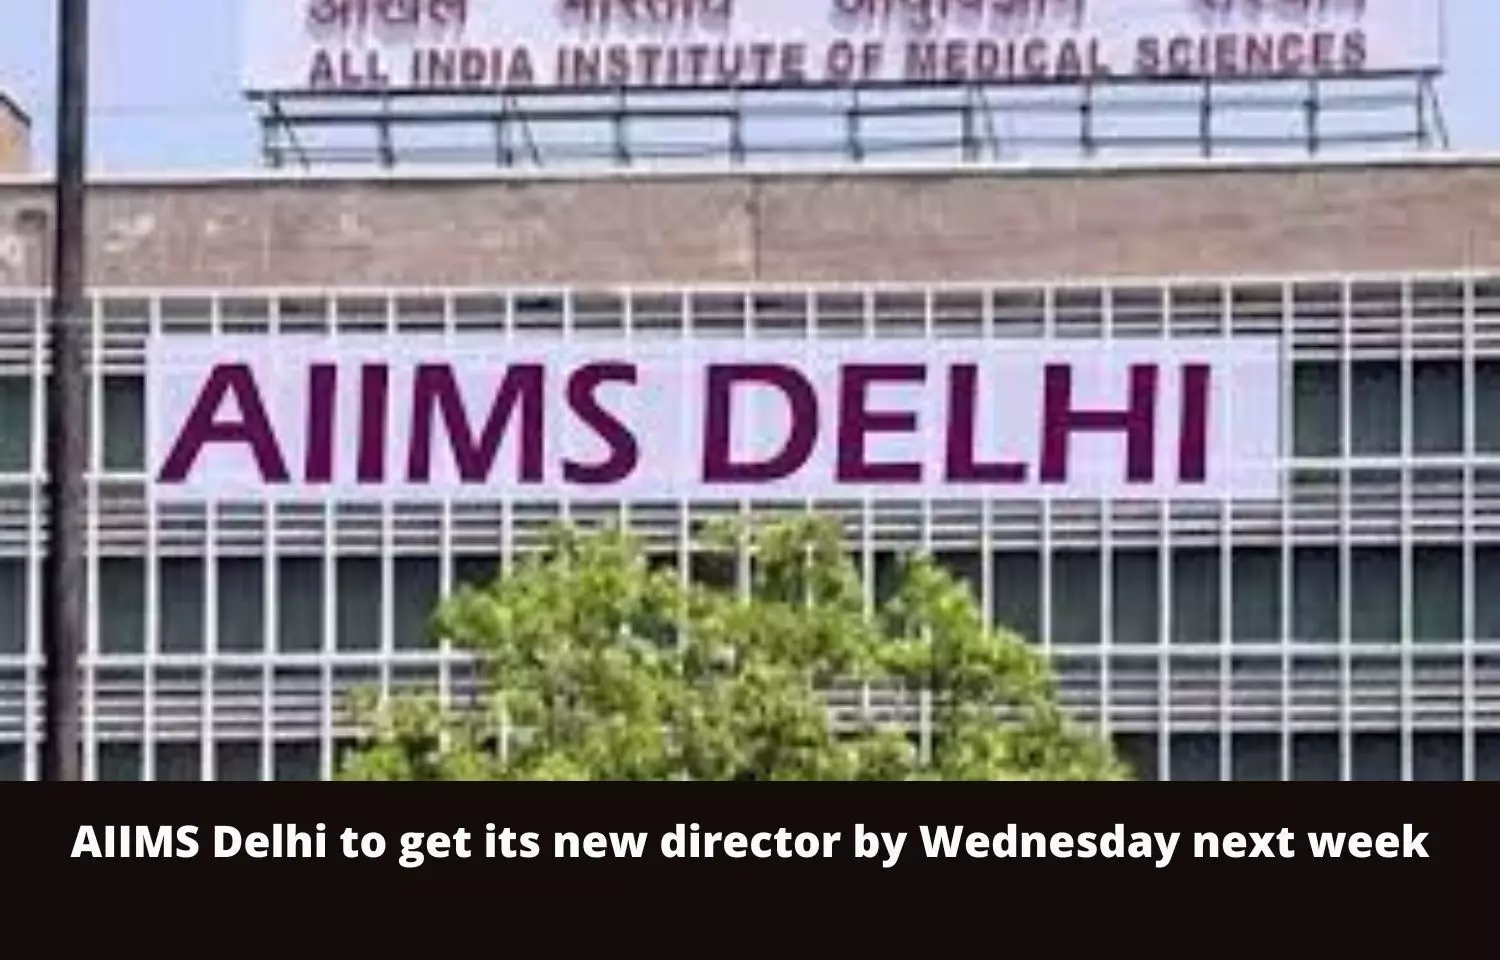 AIIMS Delhi to get its new director by Wednesday next week